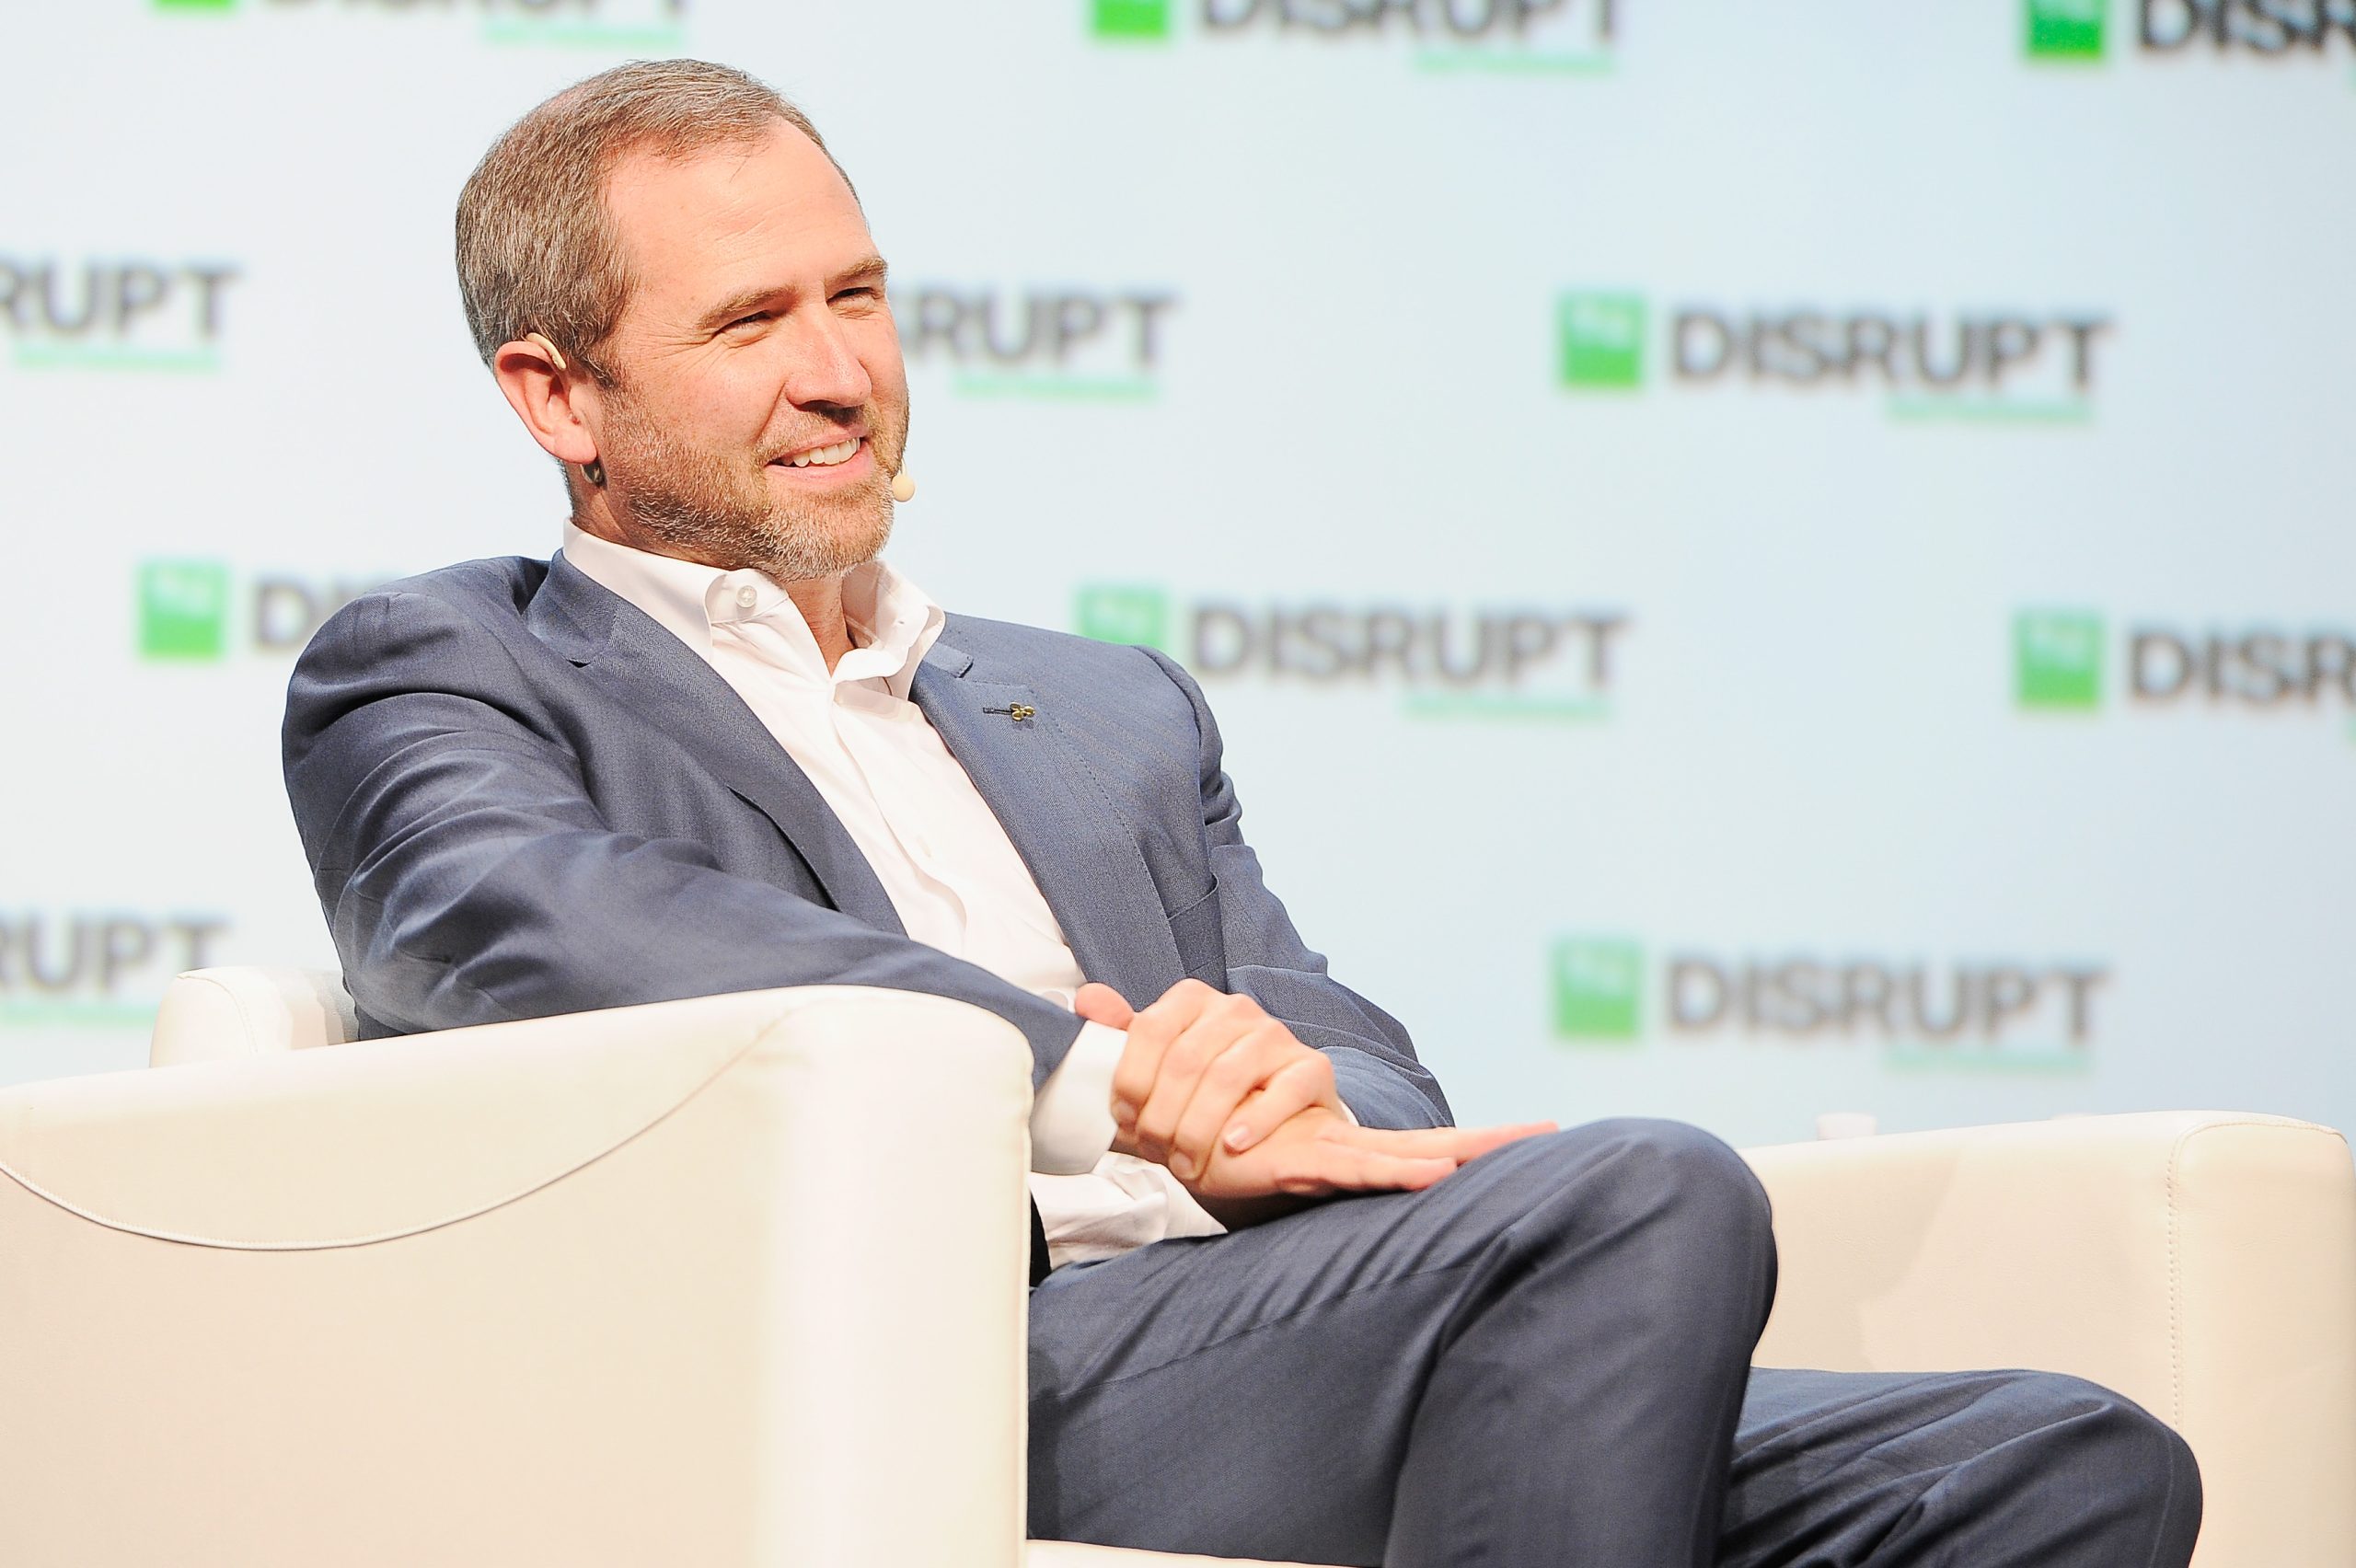 Ripple CEO Says the SEC Should Have Done Some Hard Work: ‘There Will Not Be One Winner’